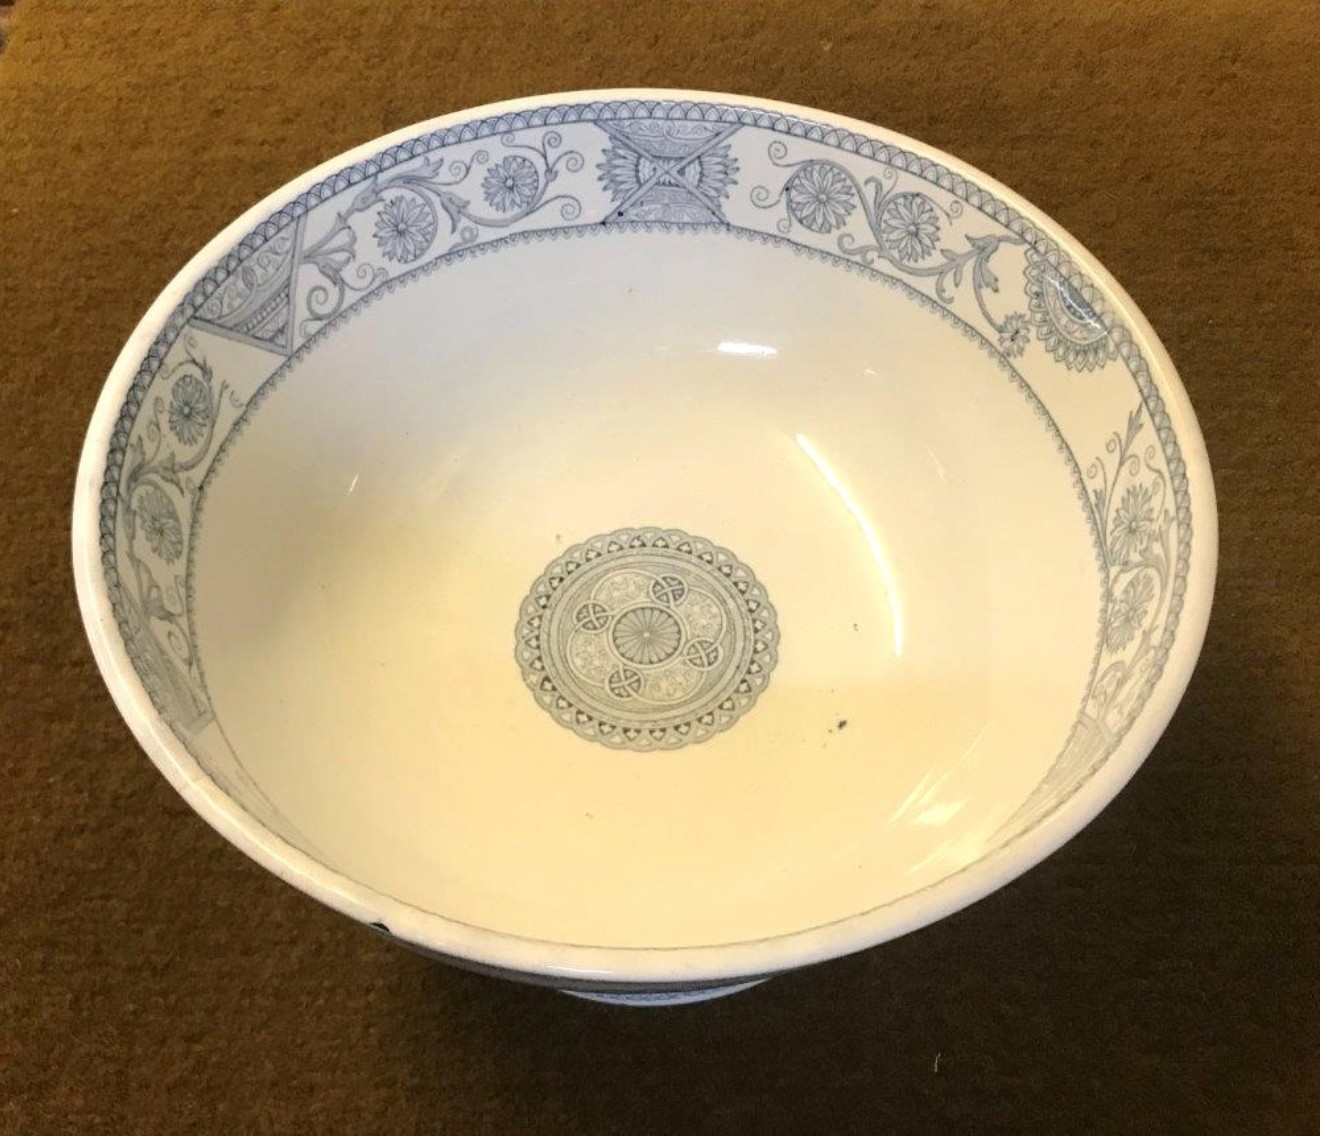 Antique Bells Pottery "Blythswood" Pattern Punch Bowl Grey / White Geometric Floral Pattern